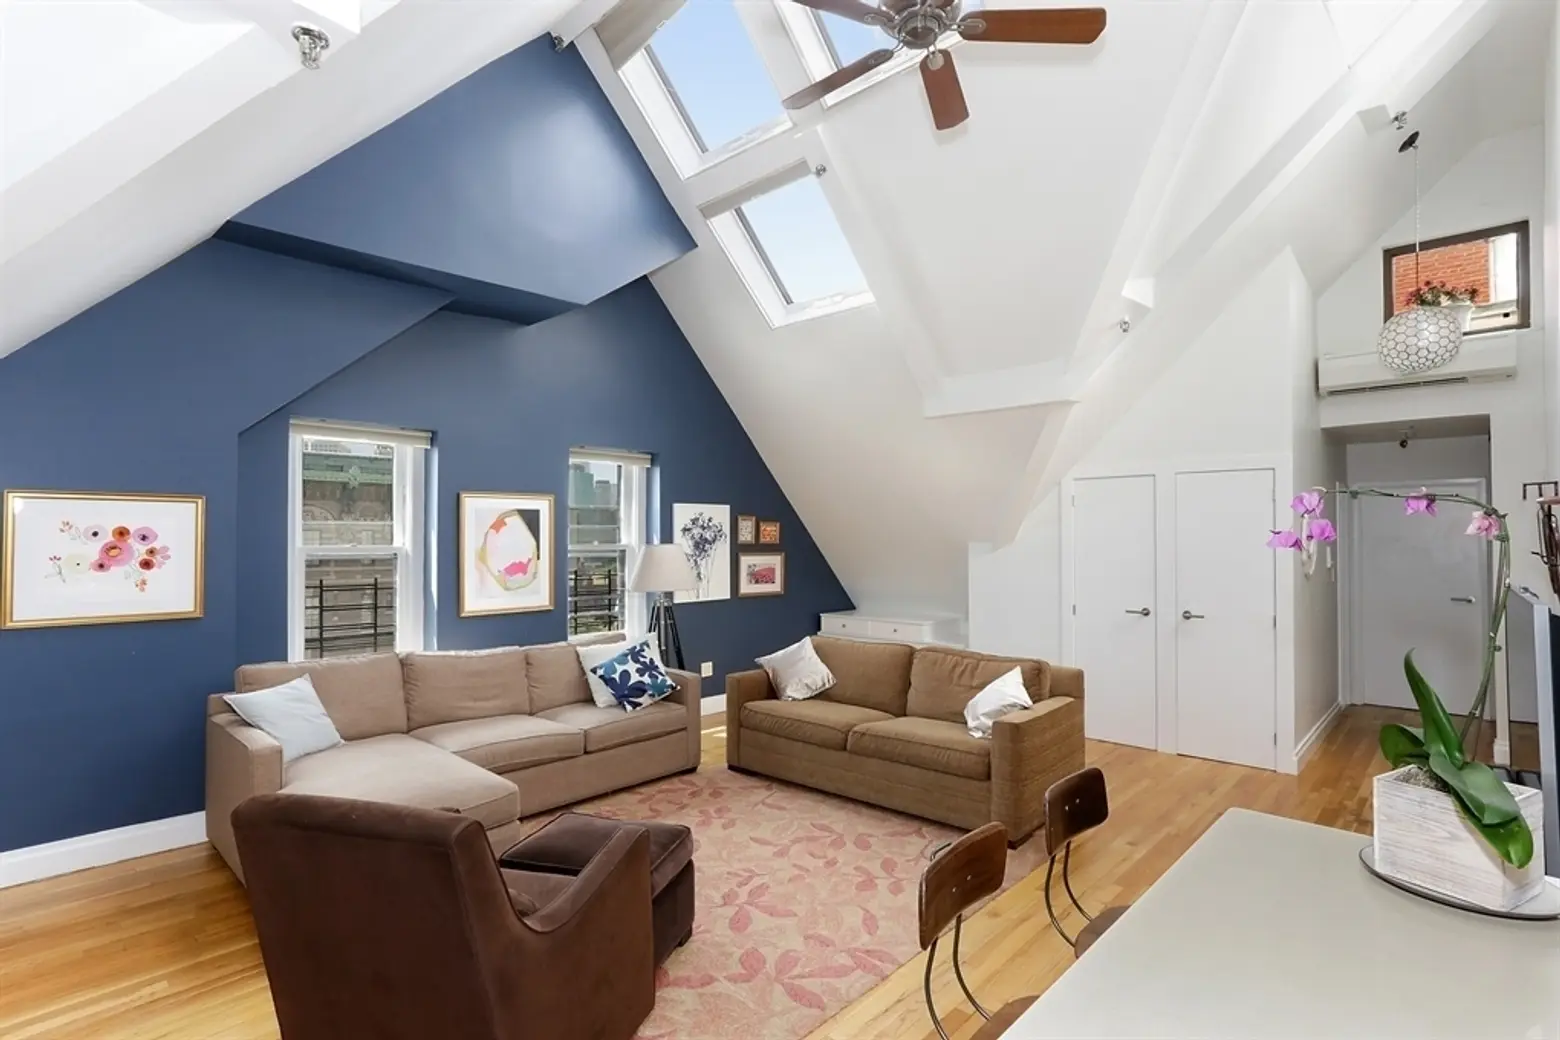 Brooklyn Heights Penthouse Asking $1.75 Million Has 16-Foot Cathedral Ceilings